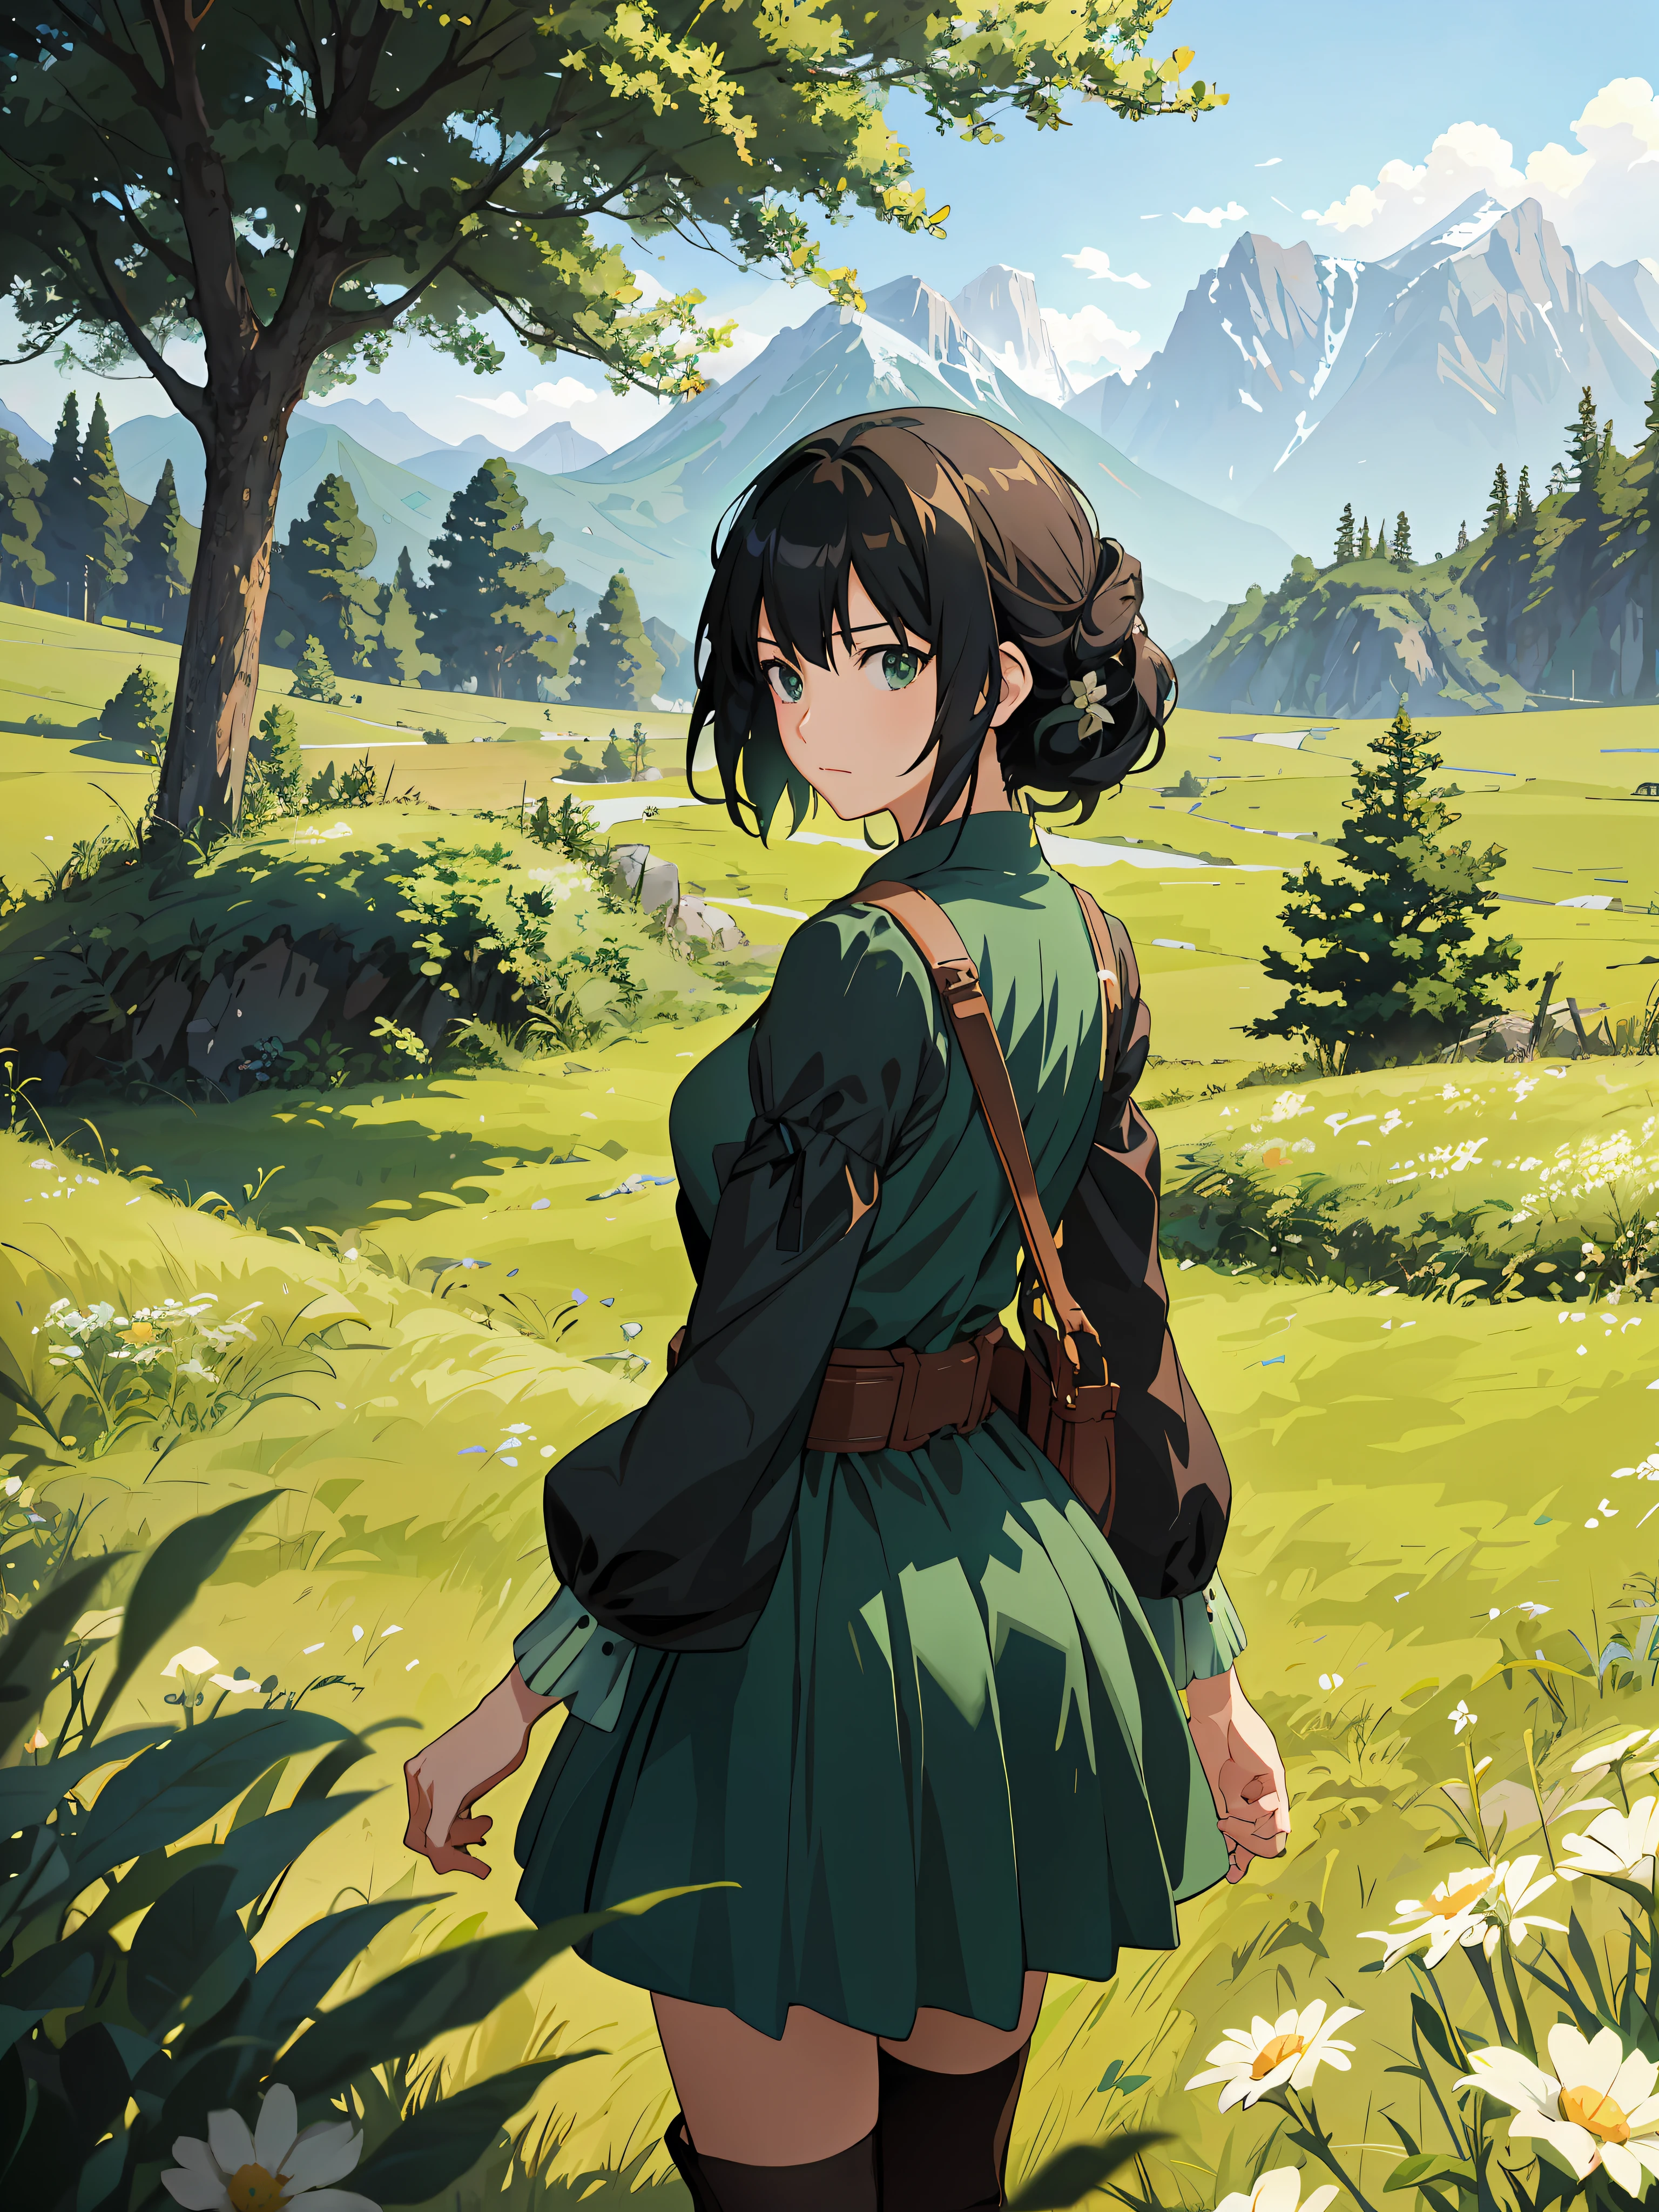 Anime girl standing in field with mountains in background in green dress, detailed digital anime art, Guvez style artwork, Artgerm and Atey Ghailan, Makoto Shinkai art style, digital anime art, digital anime illustration, smooth anime CG art, anime country landscape, 2.5 D CGI anime fantasy artwork